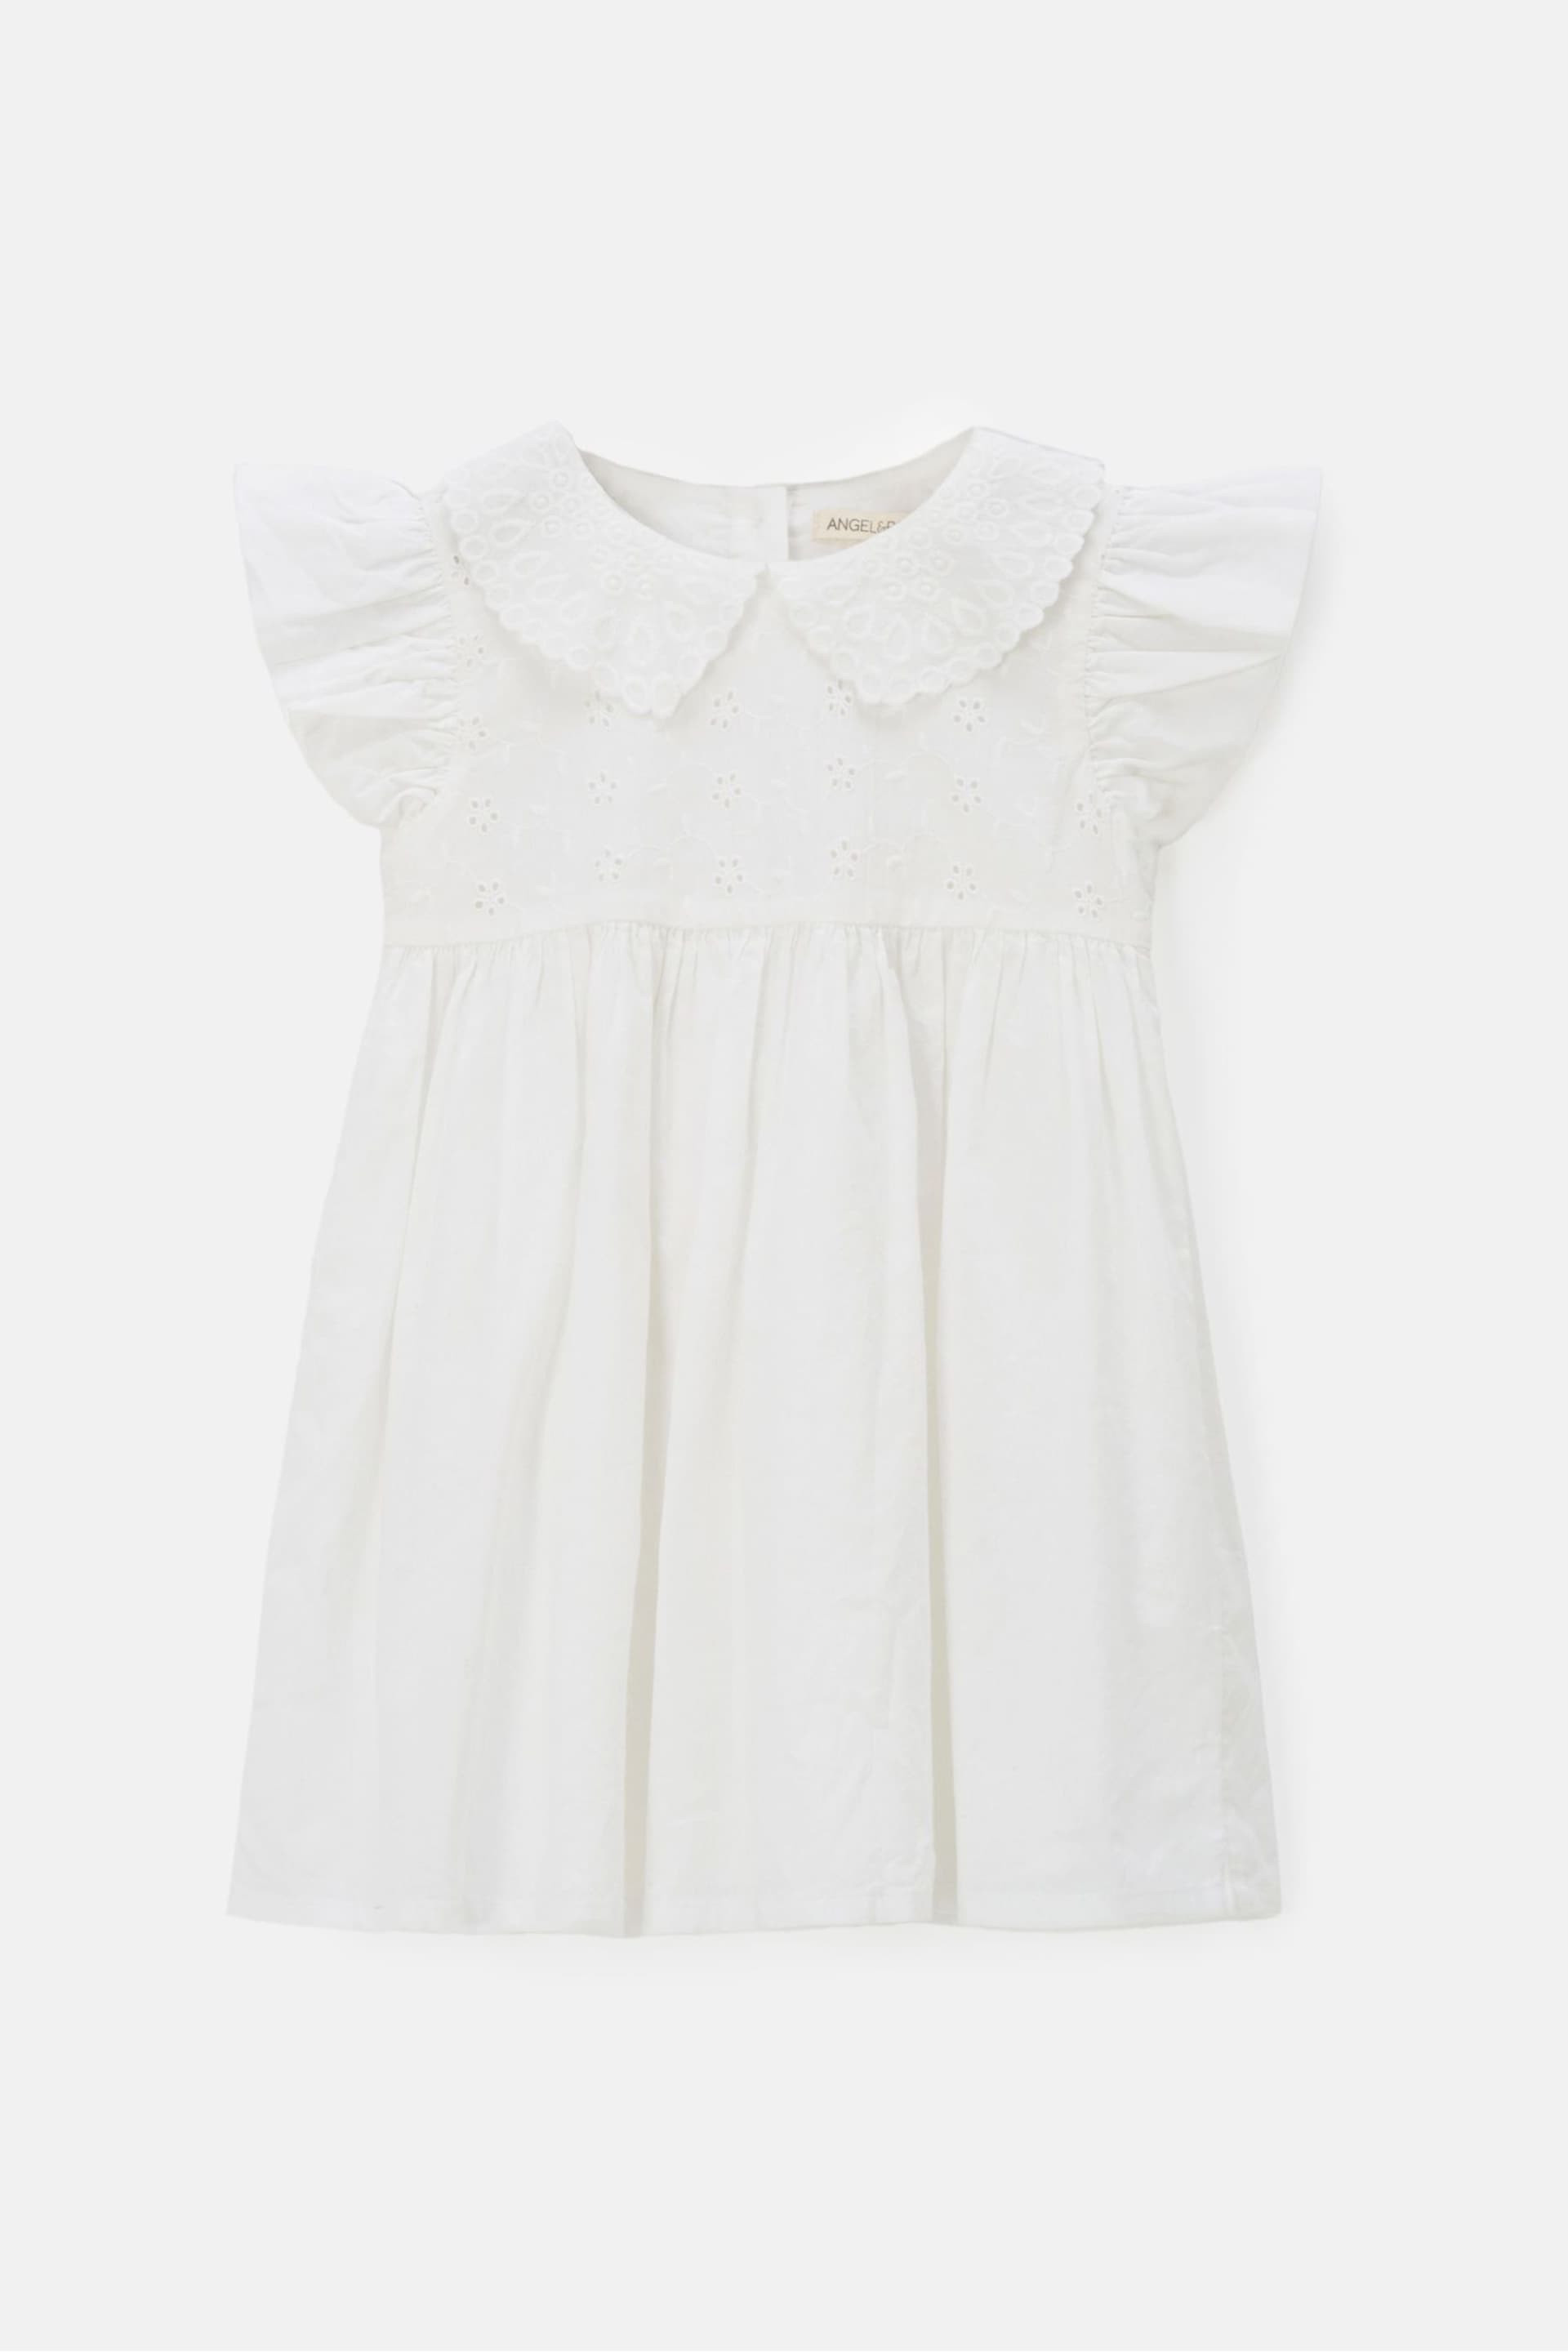 Angel & Rocket White Embroidered Collar Molly Dress - Image 2 of 4